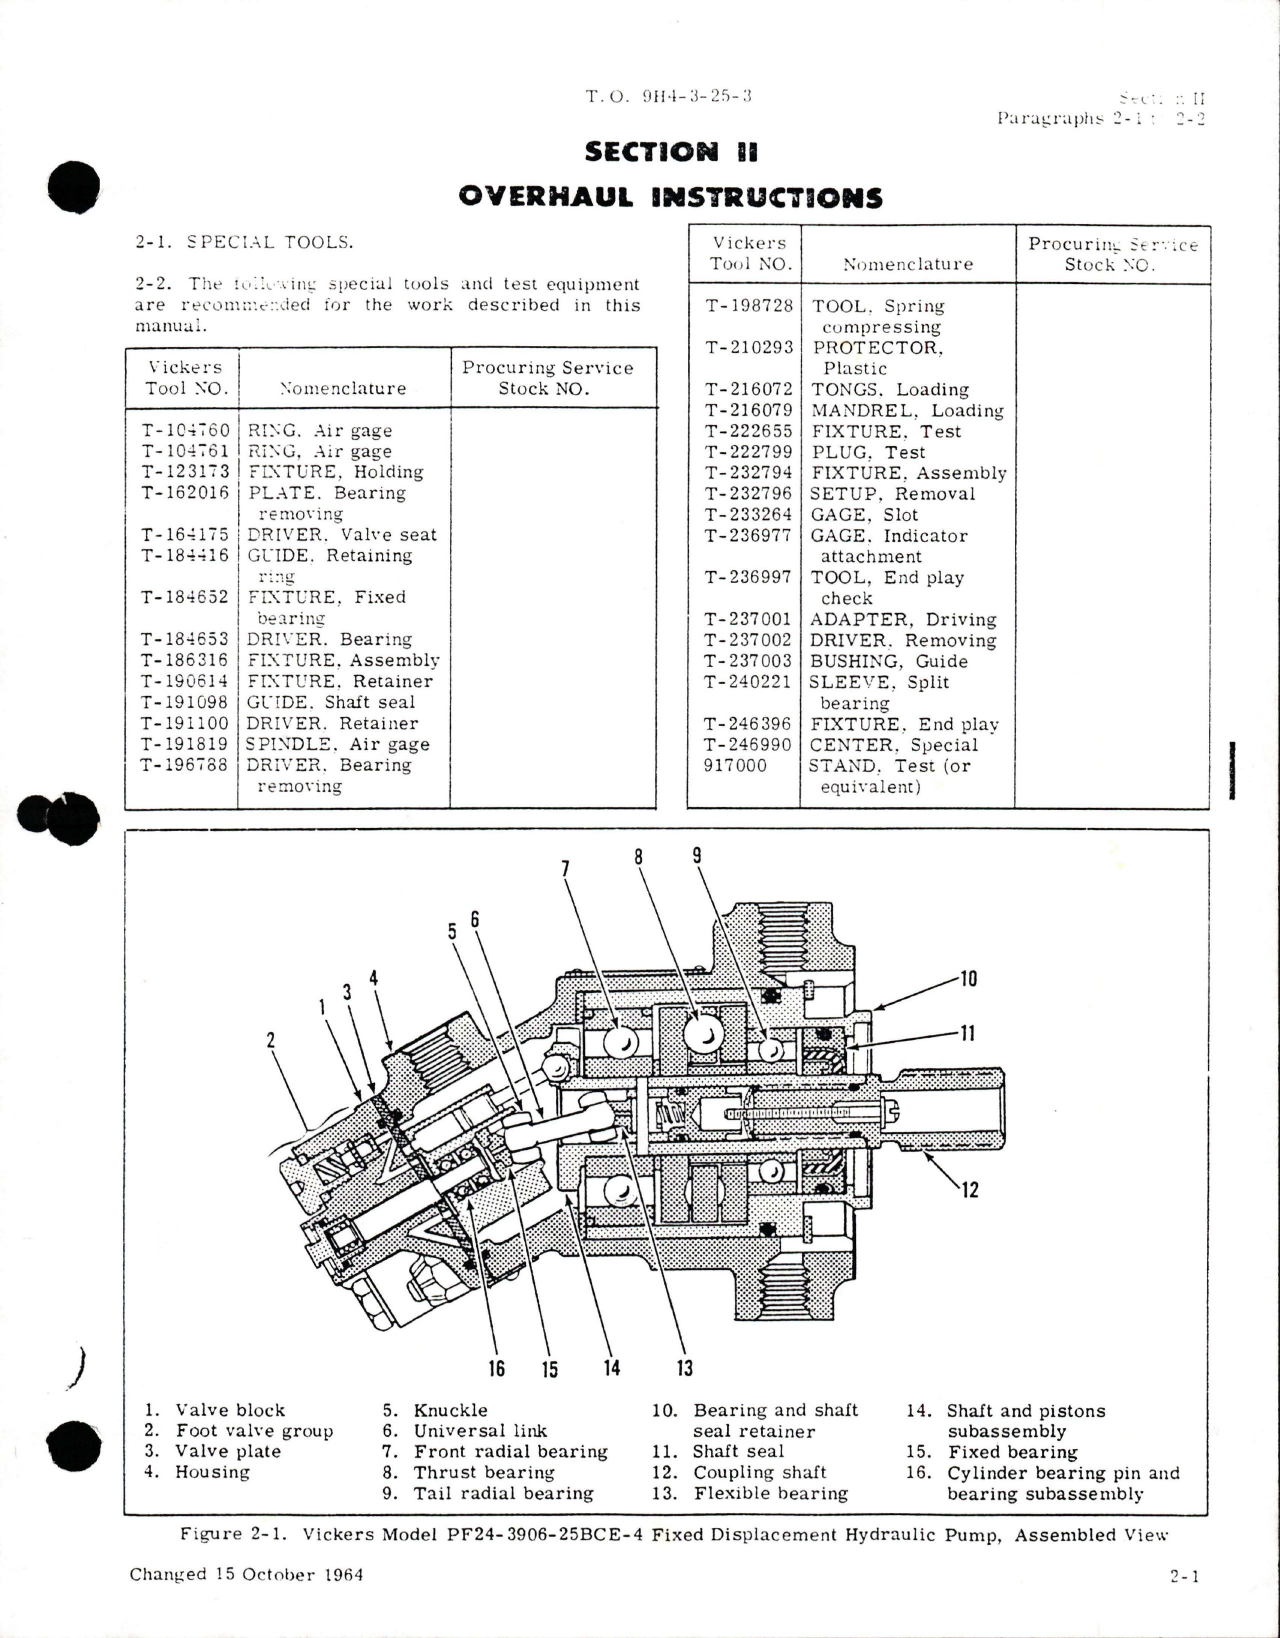 Sample page 7 from AirCorps Library document: Overhaul for Hydraulic Pump Assembly - PF-3906-4 Series 